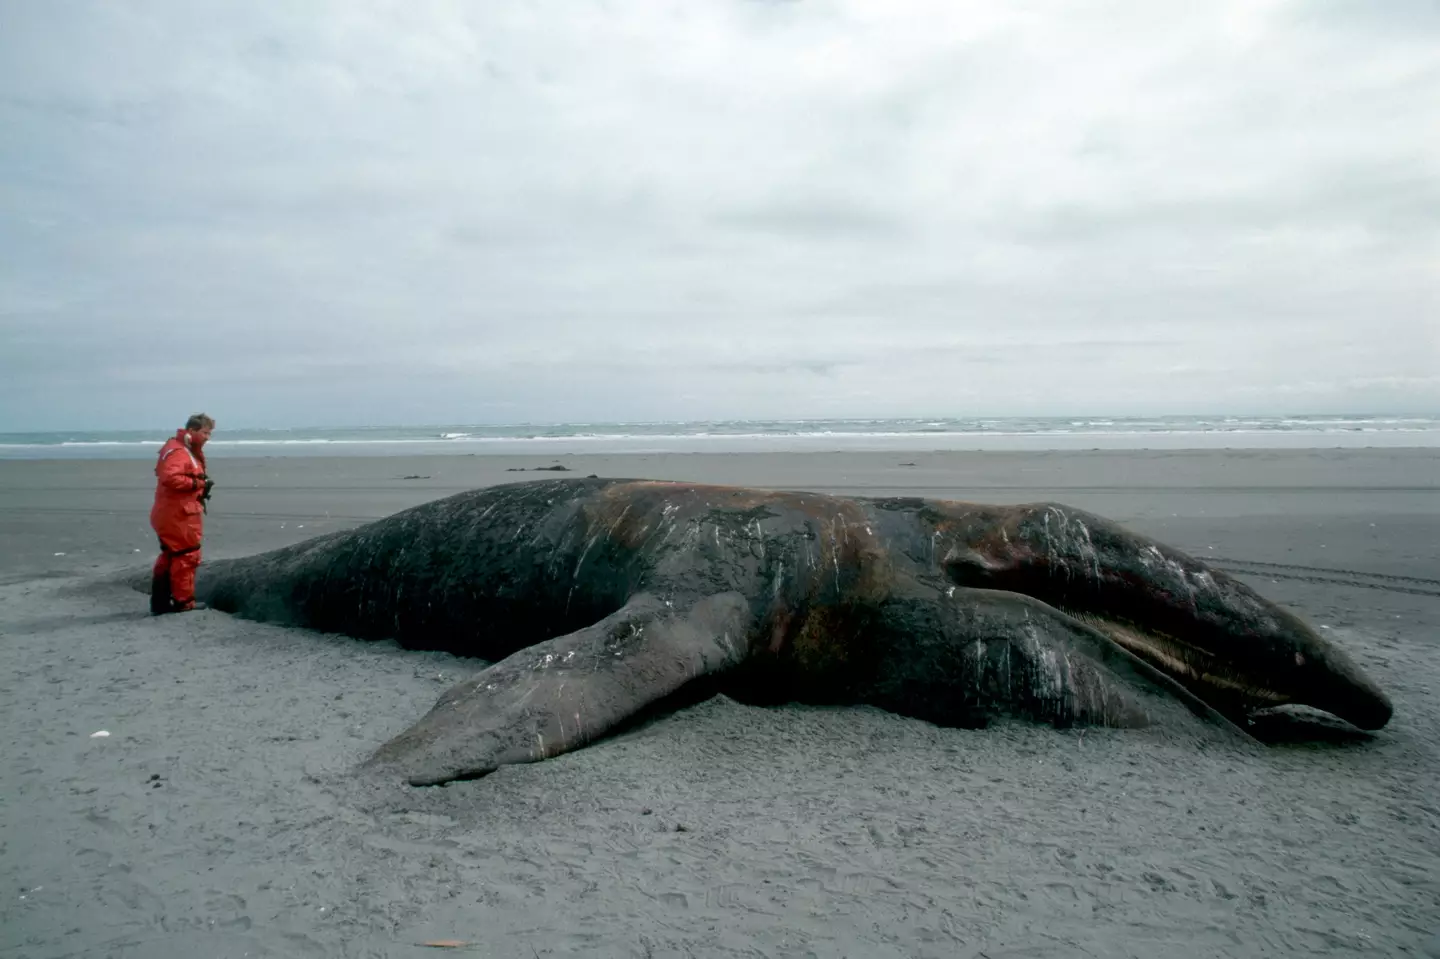 More than 2,000 gray whales are said to died on the same coast.